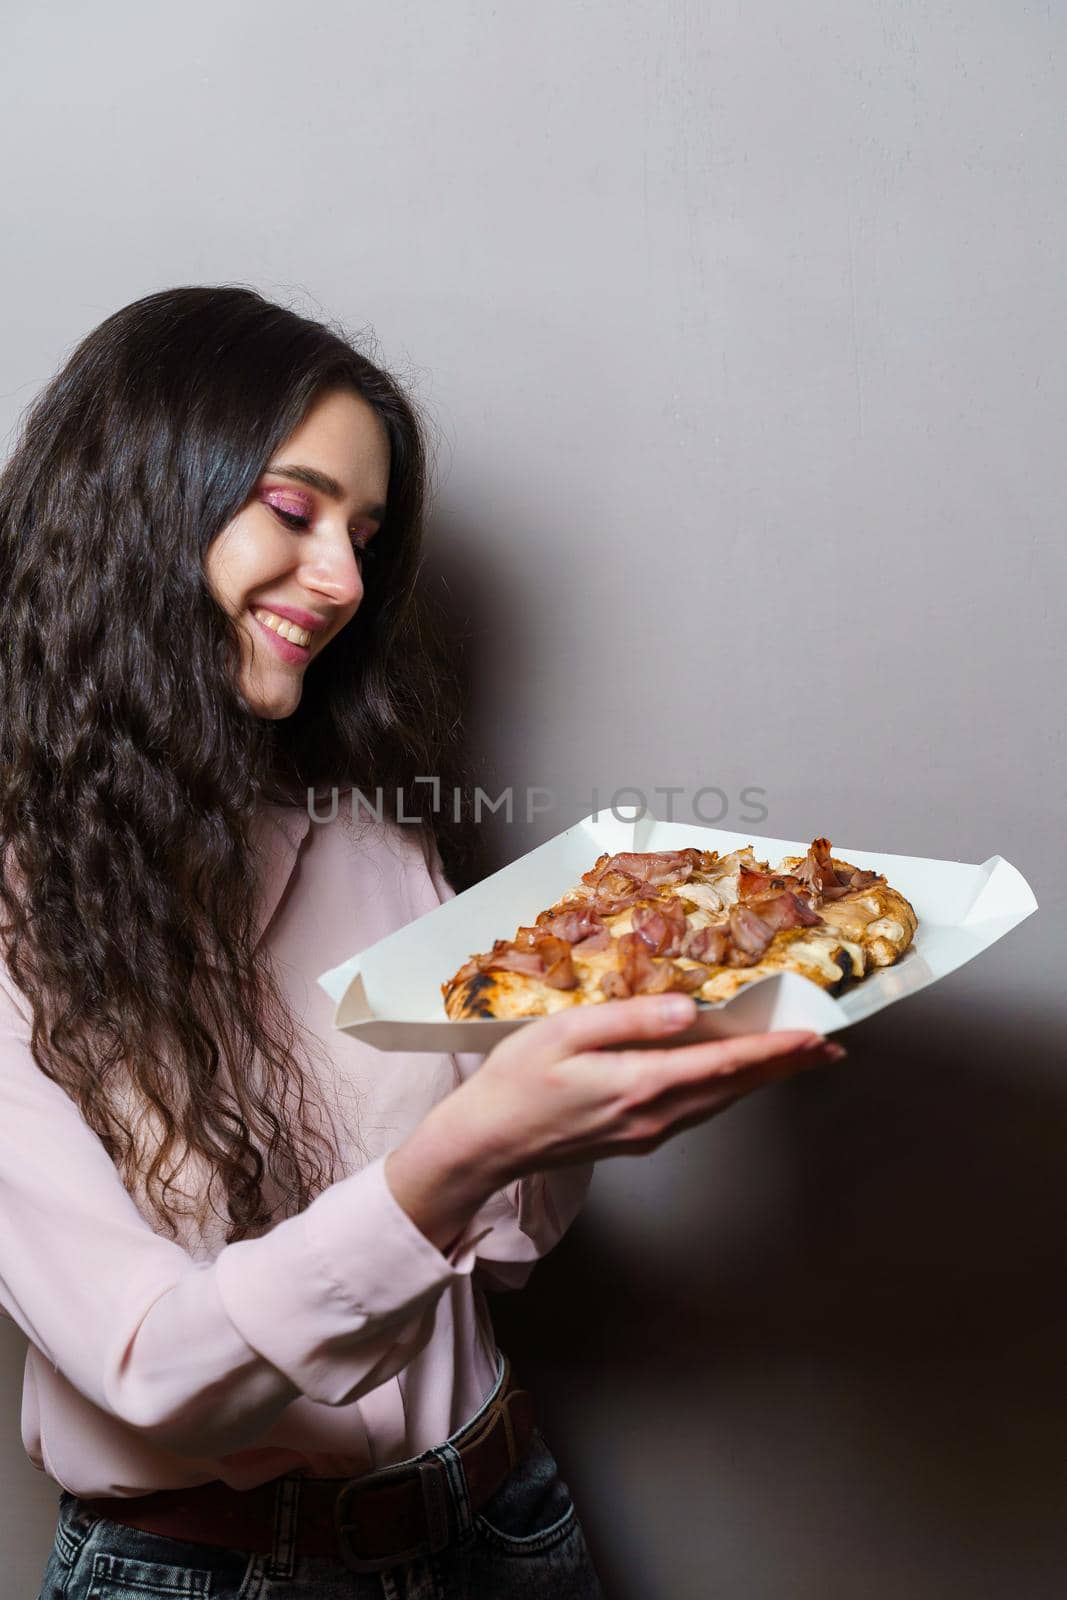 Girl courier with pinsa romana gourmet italian cuisine on grey background. Holding scrocchiarella traditional dish. Food delivery from pizzeria. Pinsa with meat, arugula, olives, cheese.